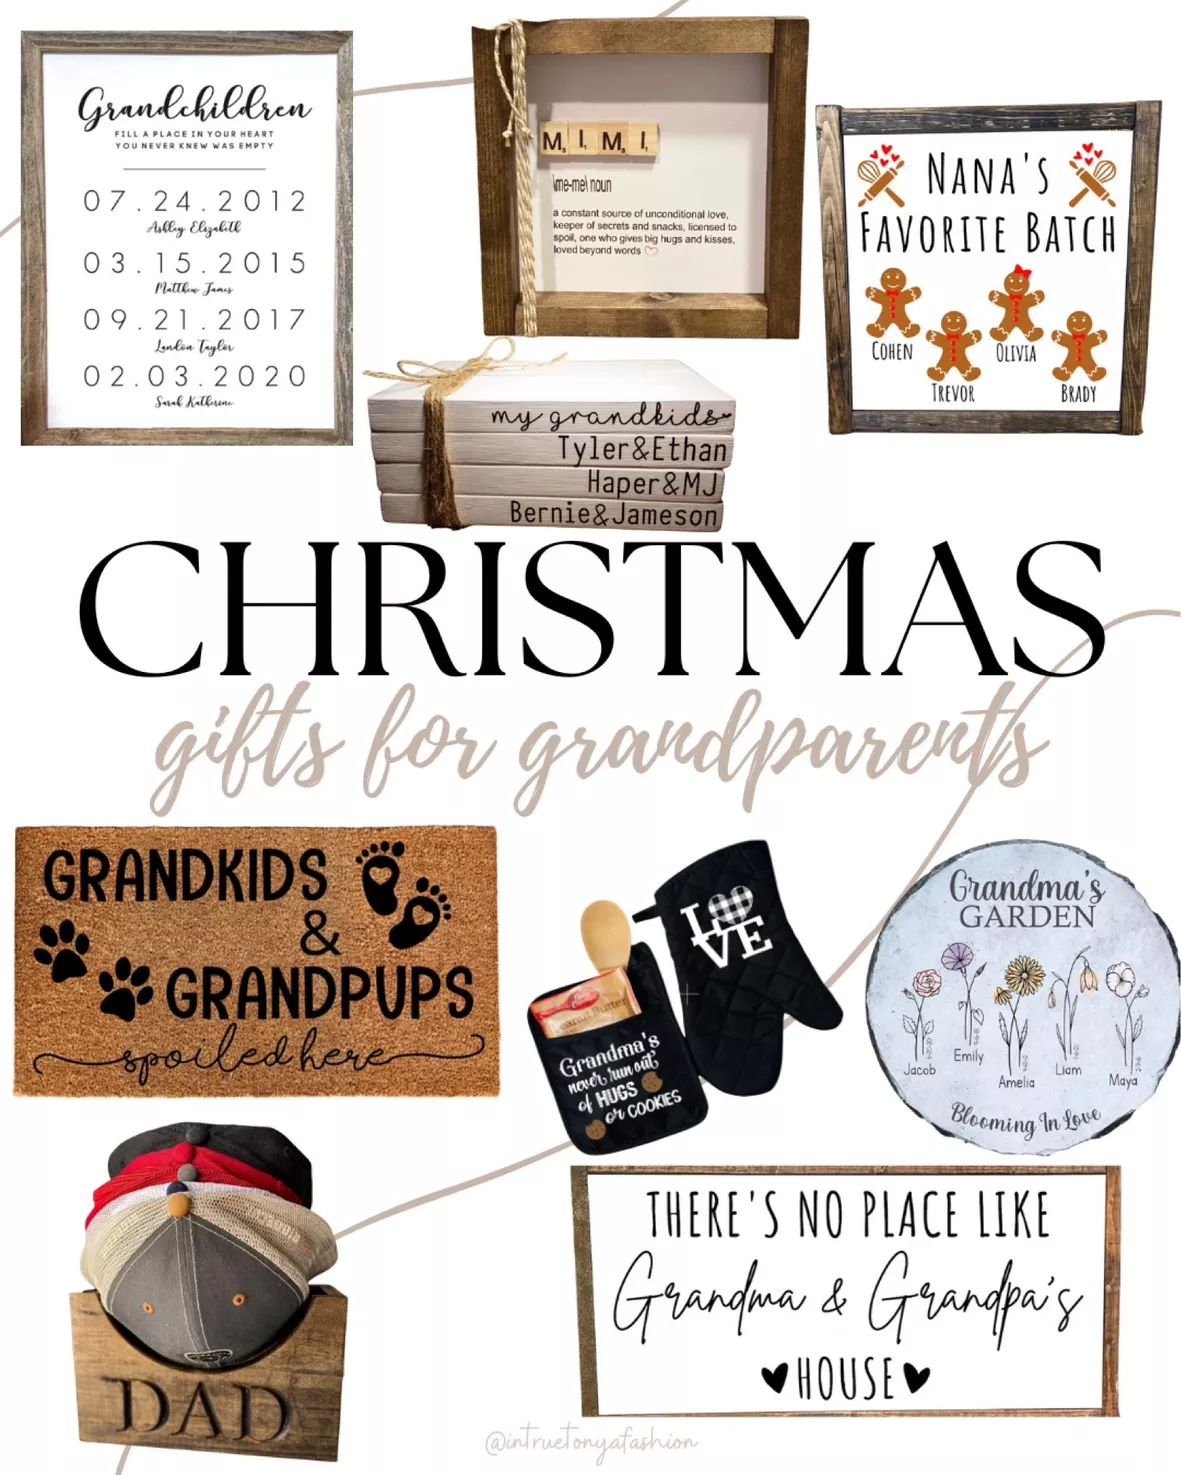 Grandma gifts-grandma cutting board-grandma's kitchen-gifts for  mimi-mom-nana grandmother-gift from grandkids-gift for mom from daughter